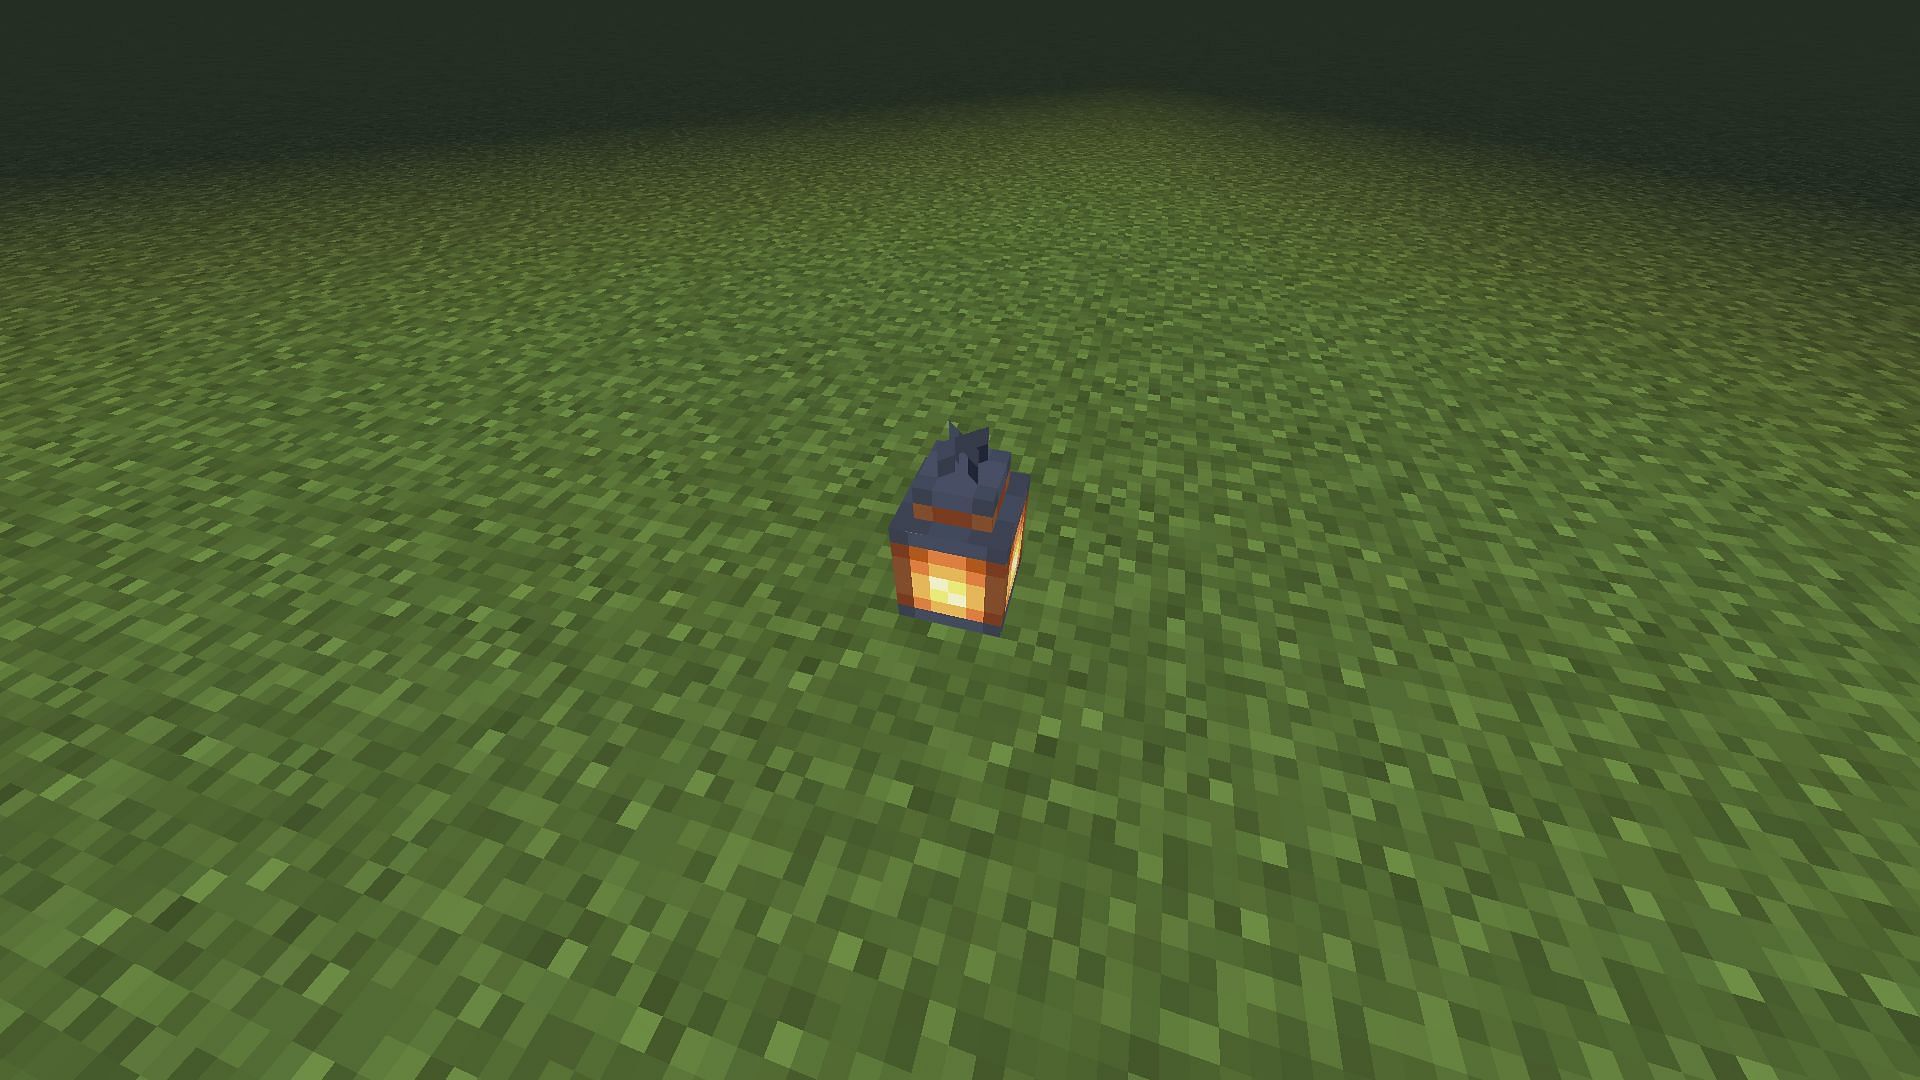 Lanterns are also blocks that emit light and prevent hostile mobs from spawning in Minecraft (Image via Mojang)